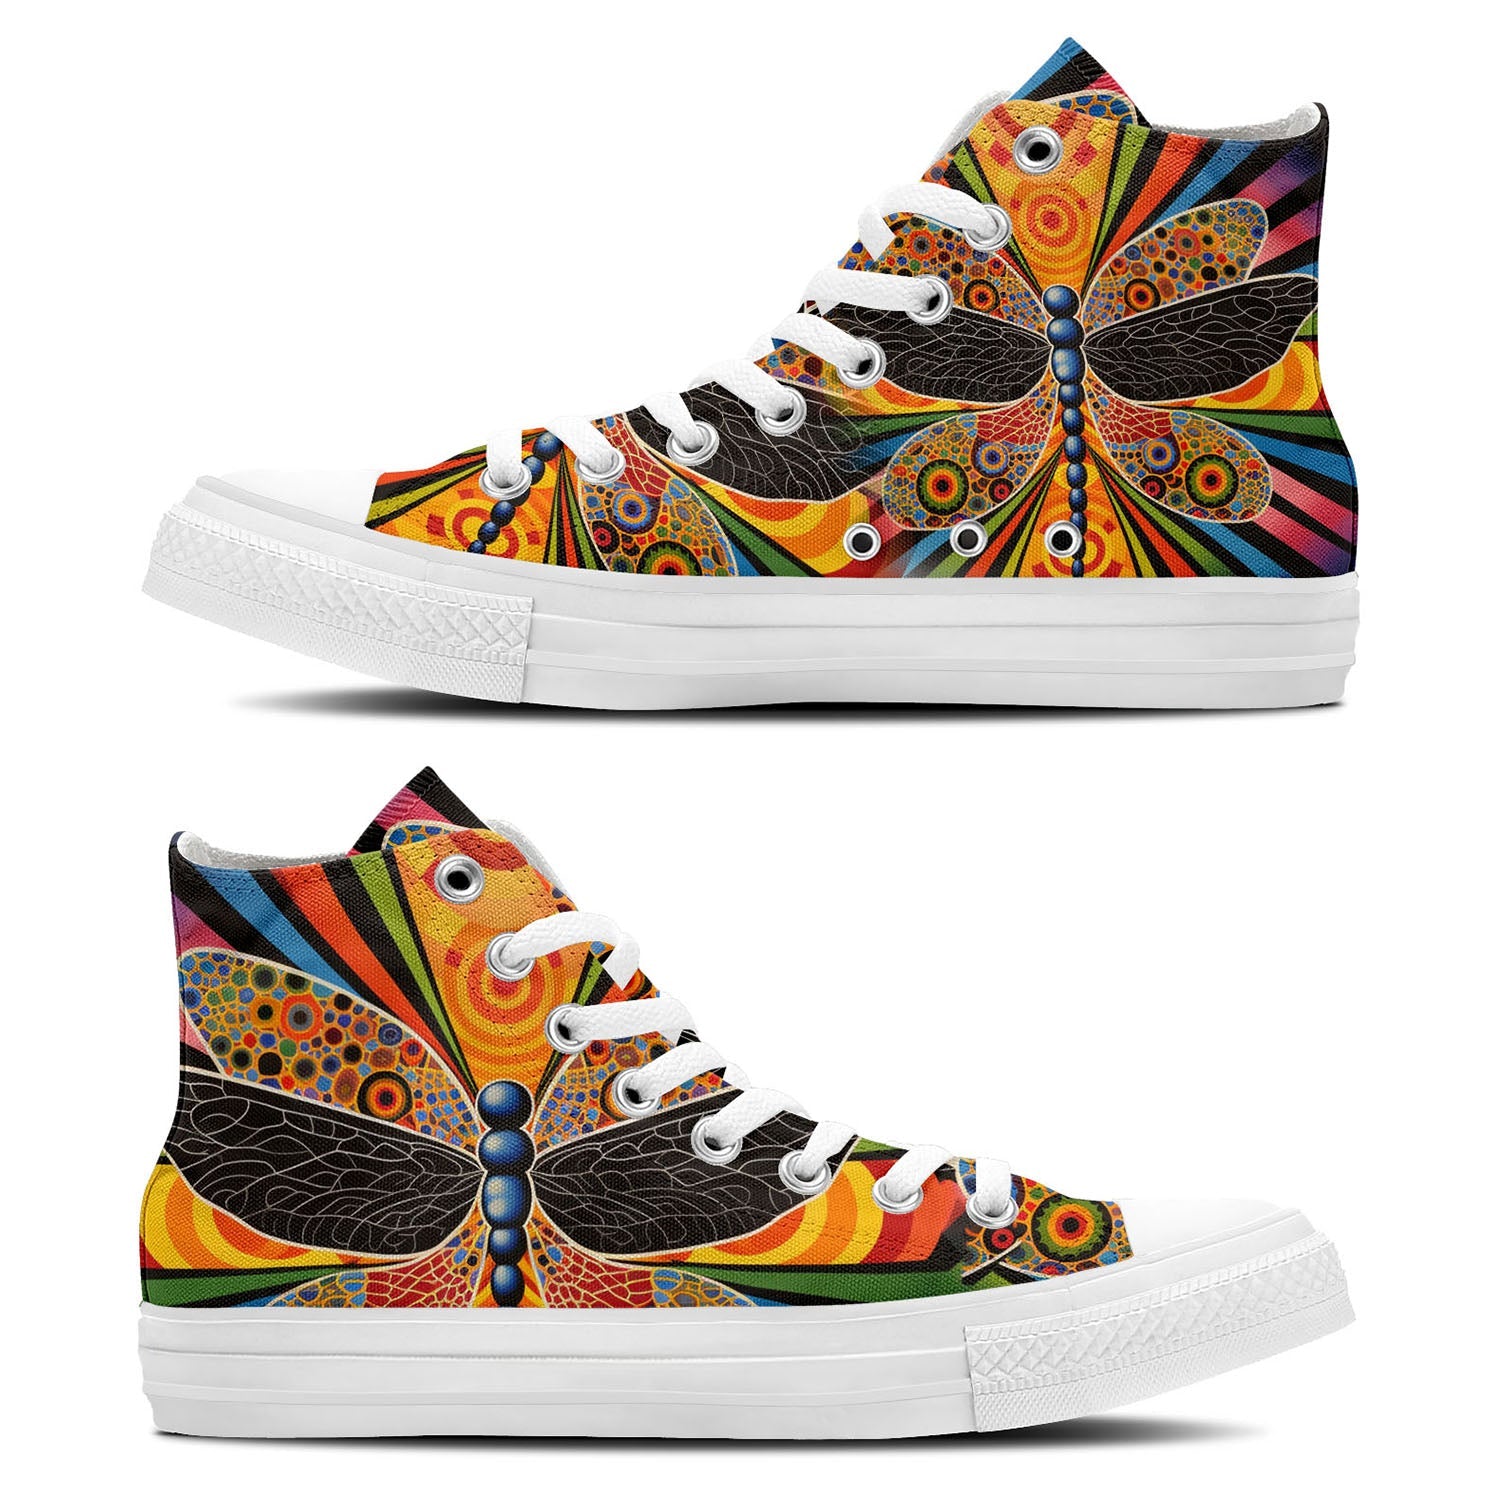 Artistic Flight: Central-High Canvas Shoes featuring Op Art Dragonfly Illustrations – Elevate Your Fashion Game for Both Genders